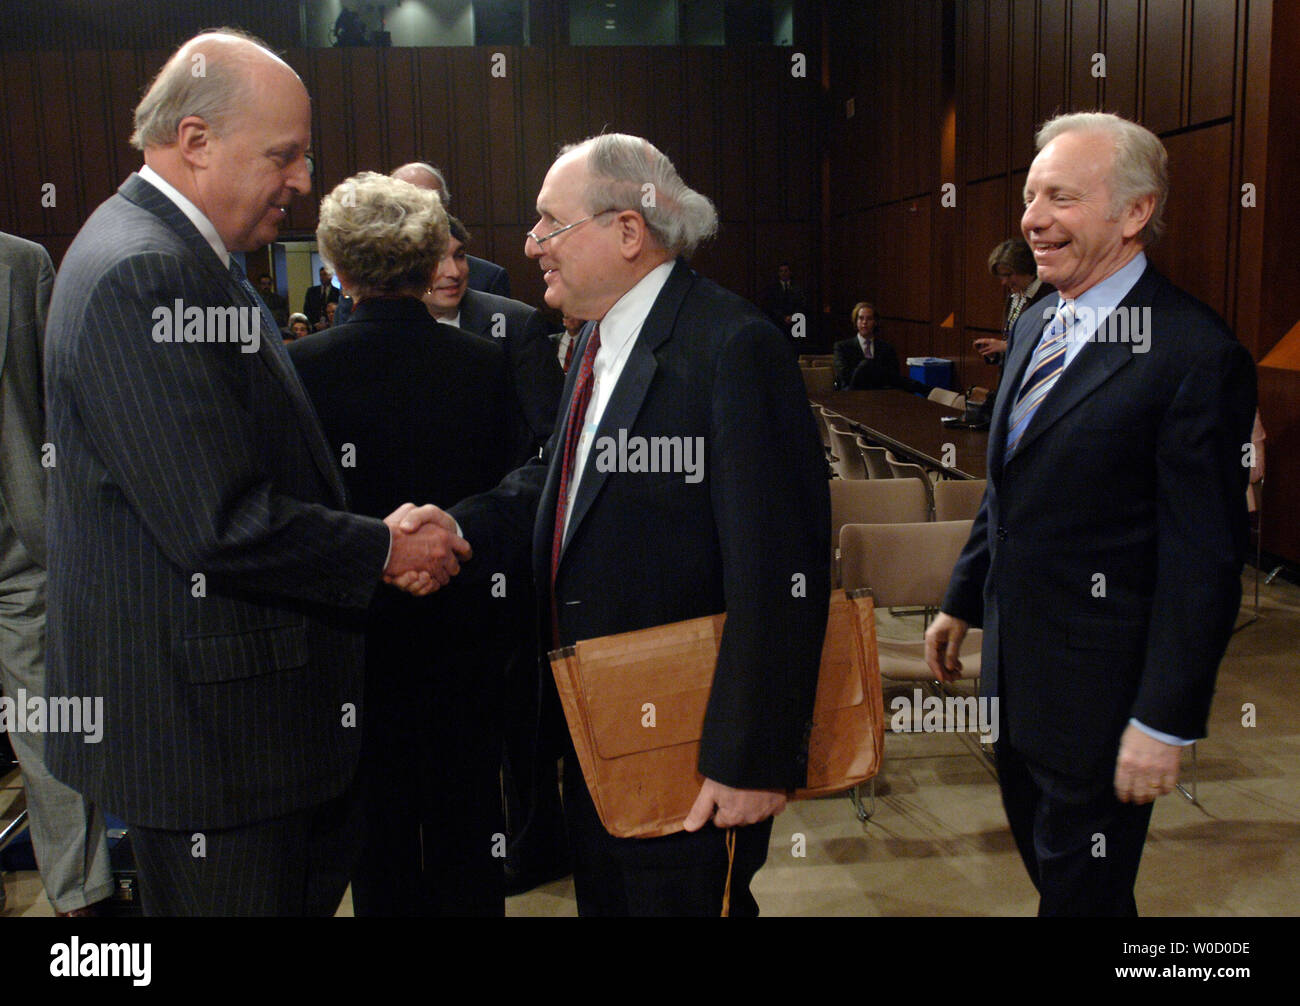 National Intelligence Director John Negroponte (L) greets Sen. Carl Levin (D-MI), as Sen. Joseph Liberman (D-CT) watches on, before testifying before a Senate Armed Services Committee Hearing on the worldwide threats to US national security, in Washington on February 28, 2006. (UPI Photo/Kevin Dietsch) Stock Photo